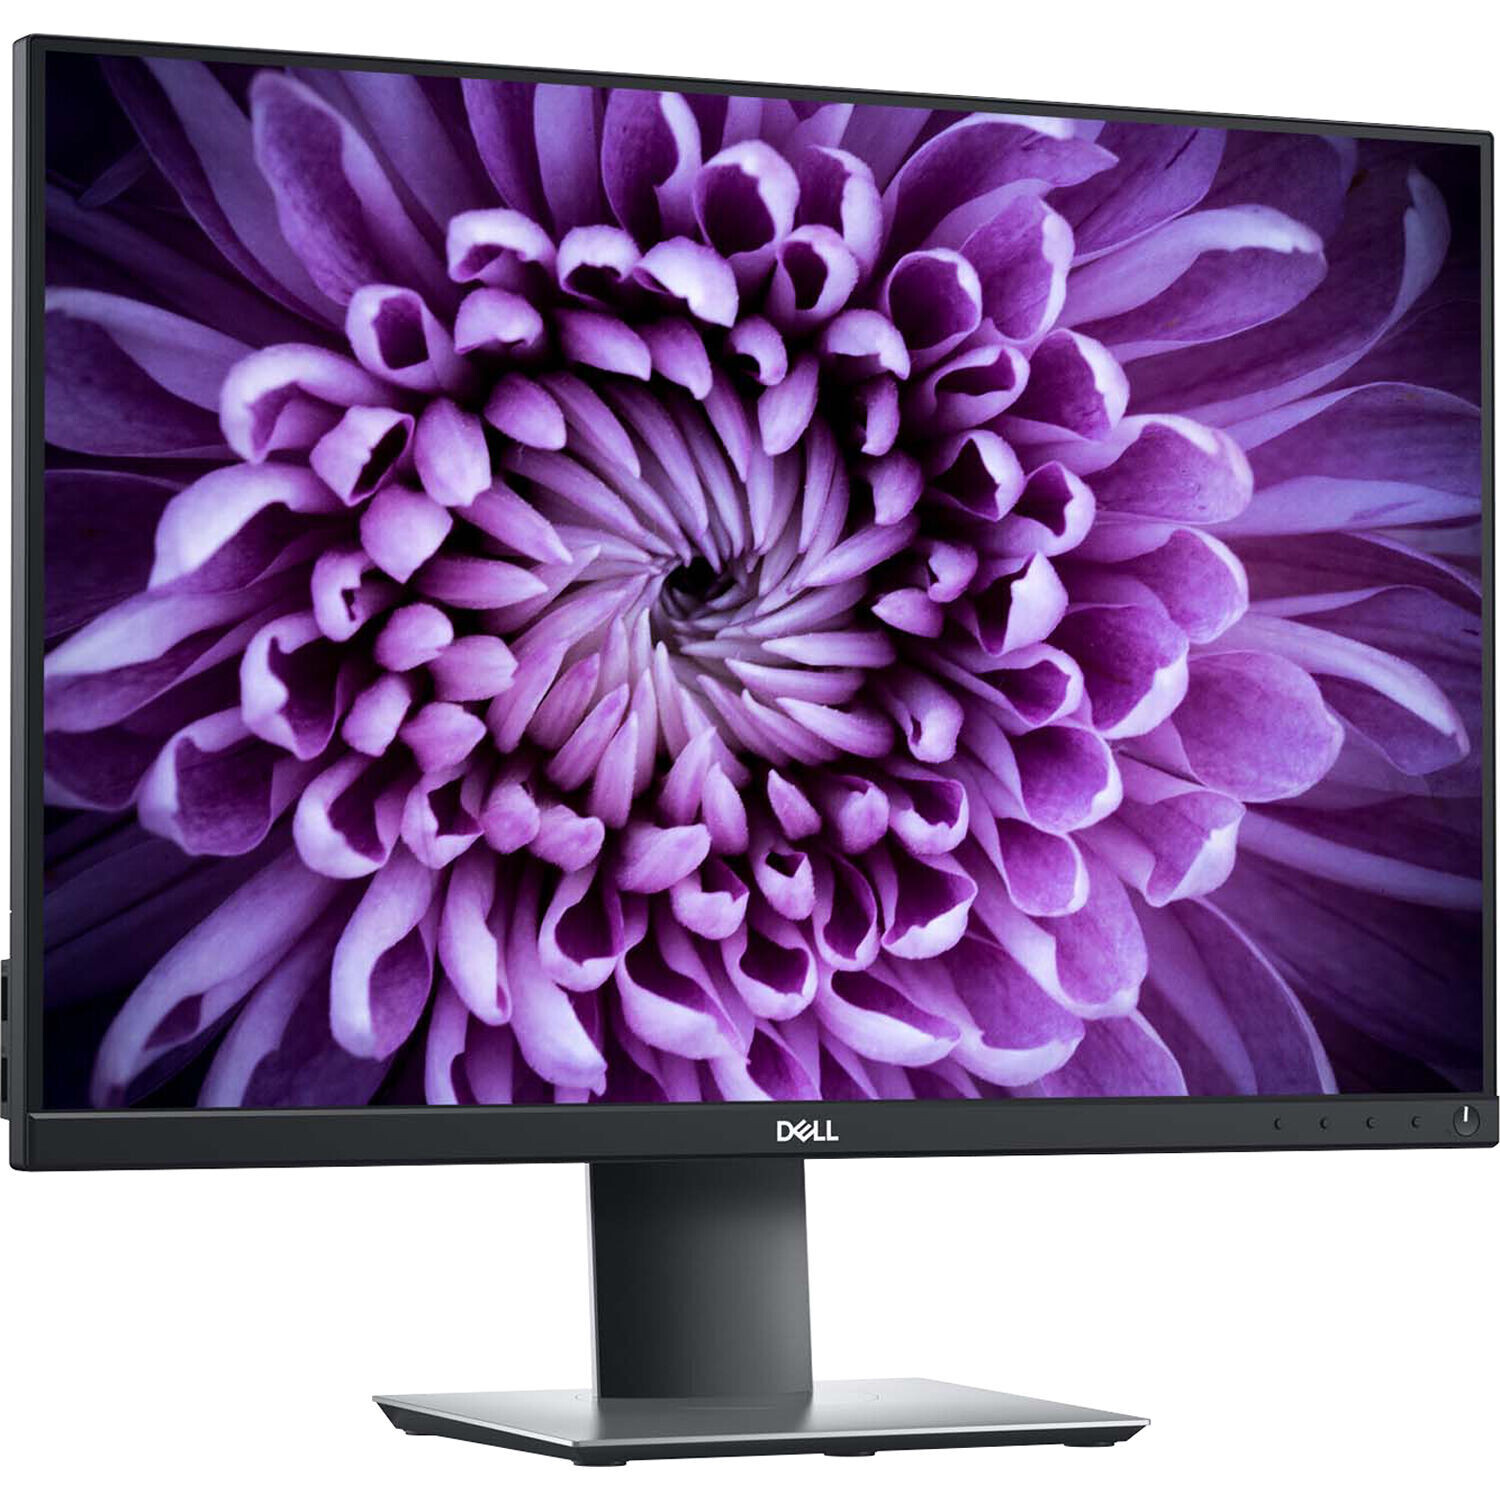 Monitor DELL Professional P2421 24.1in, 1920x1200, FHD+, IPS Antiglare, 16:10, 1000:1, 300 cd/m2, 8ms/5ms, 178/178, DP, HDMI, VGA, DVI, 3x USB 3.0, 2x USB 2.0, Tilt, Swivel, Pivot, Height Adjust